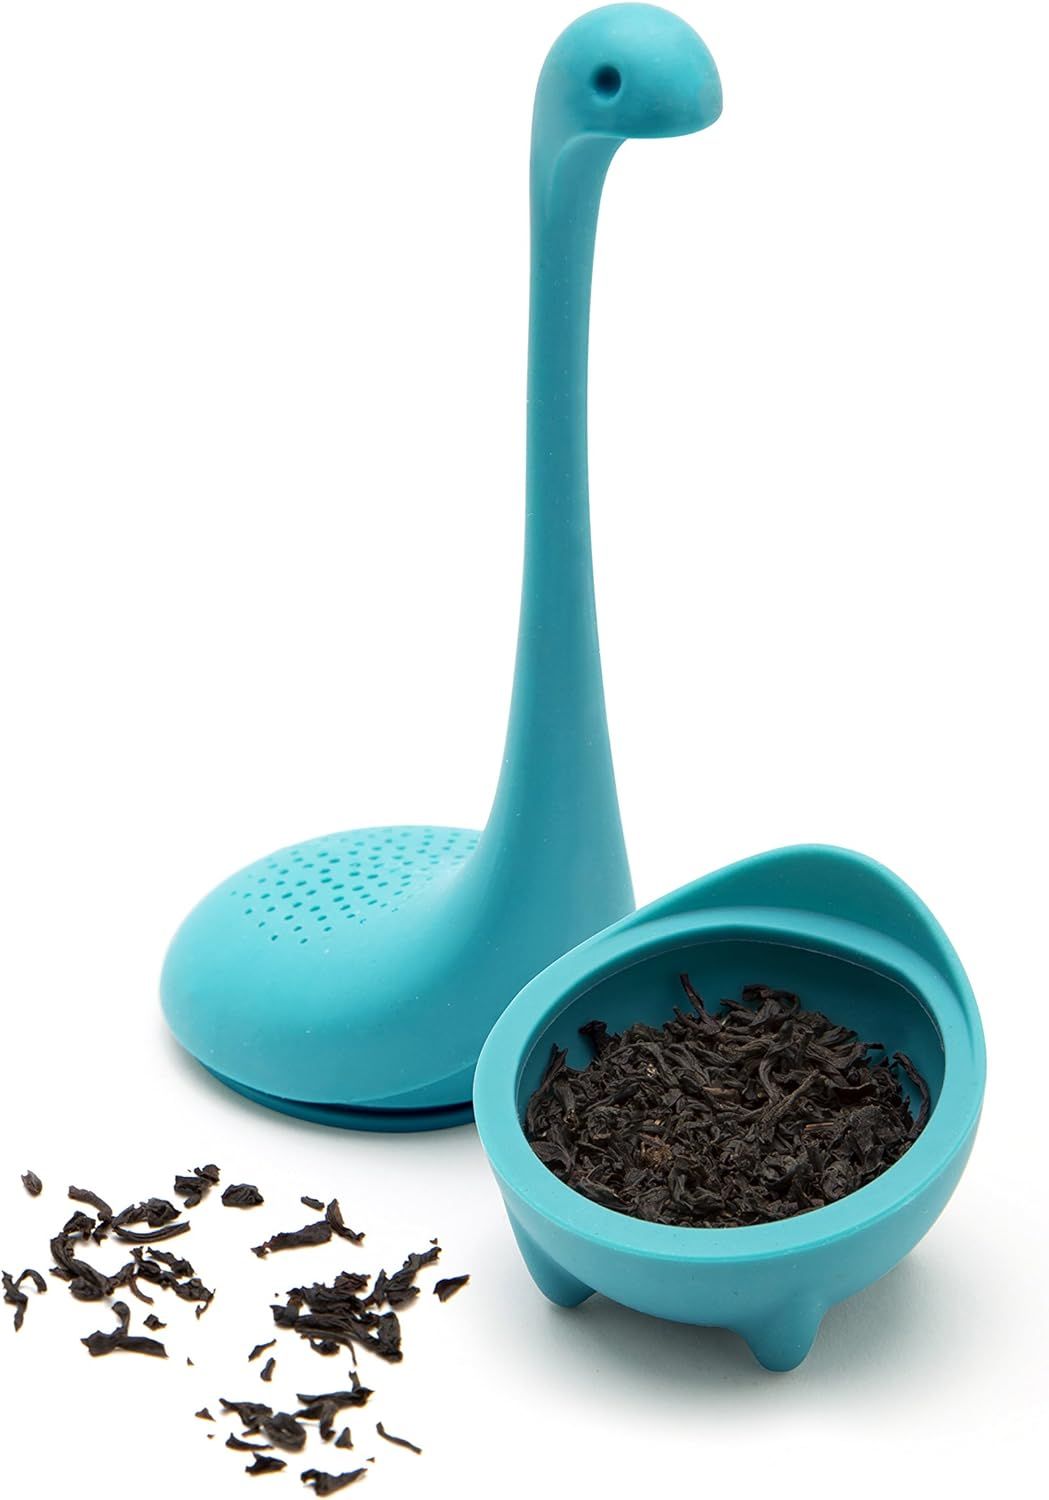 Baby Nessie the Loch Ness Monster Tea Infuser -Turquoise | Amazon (US)